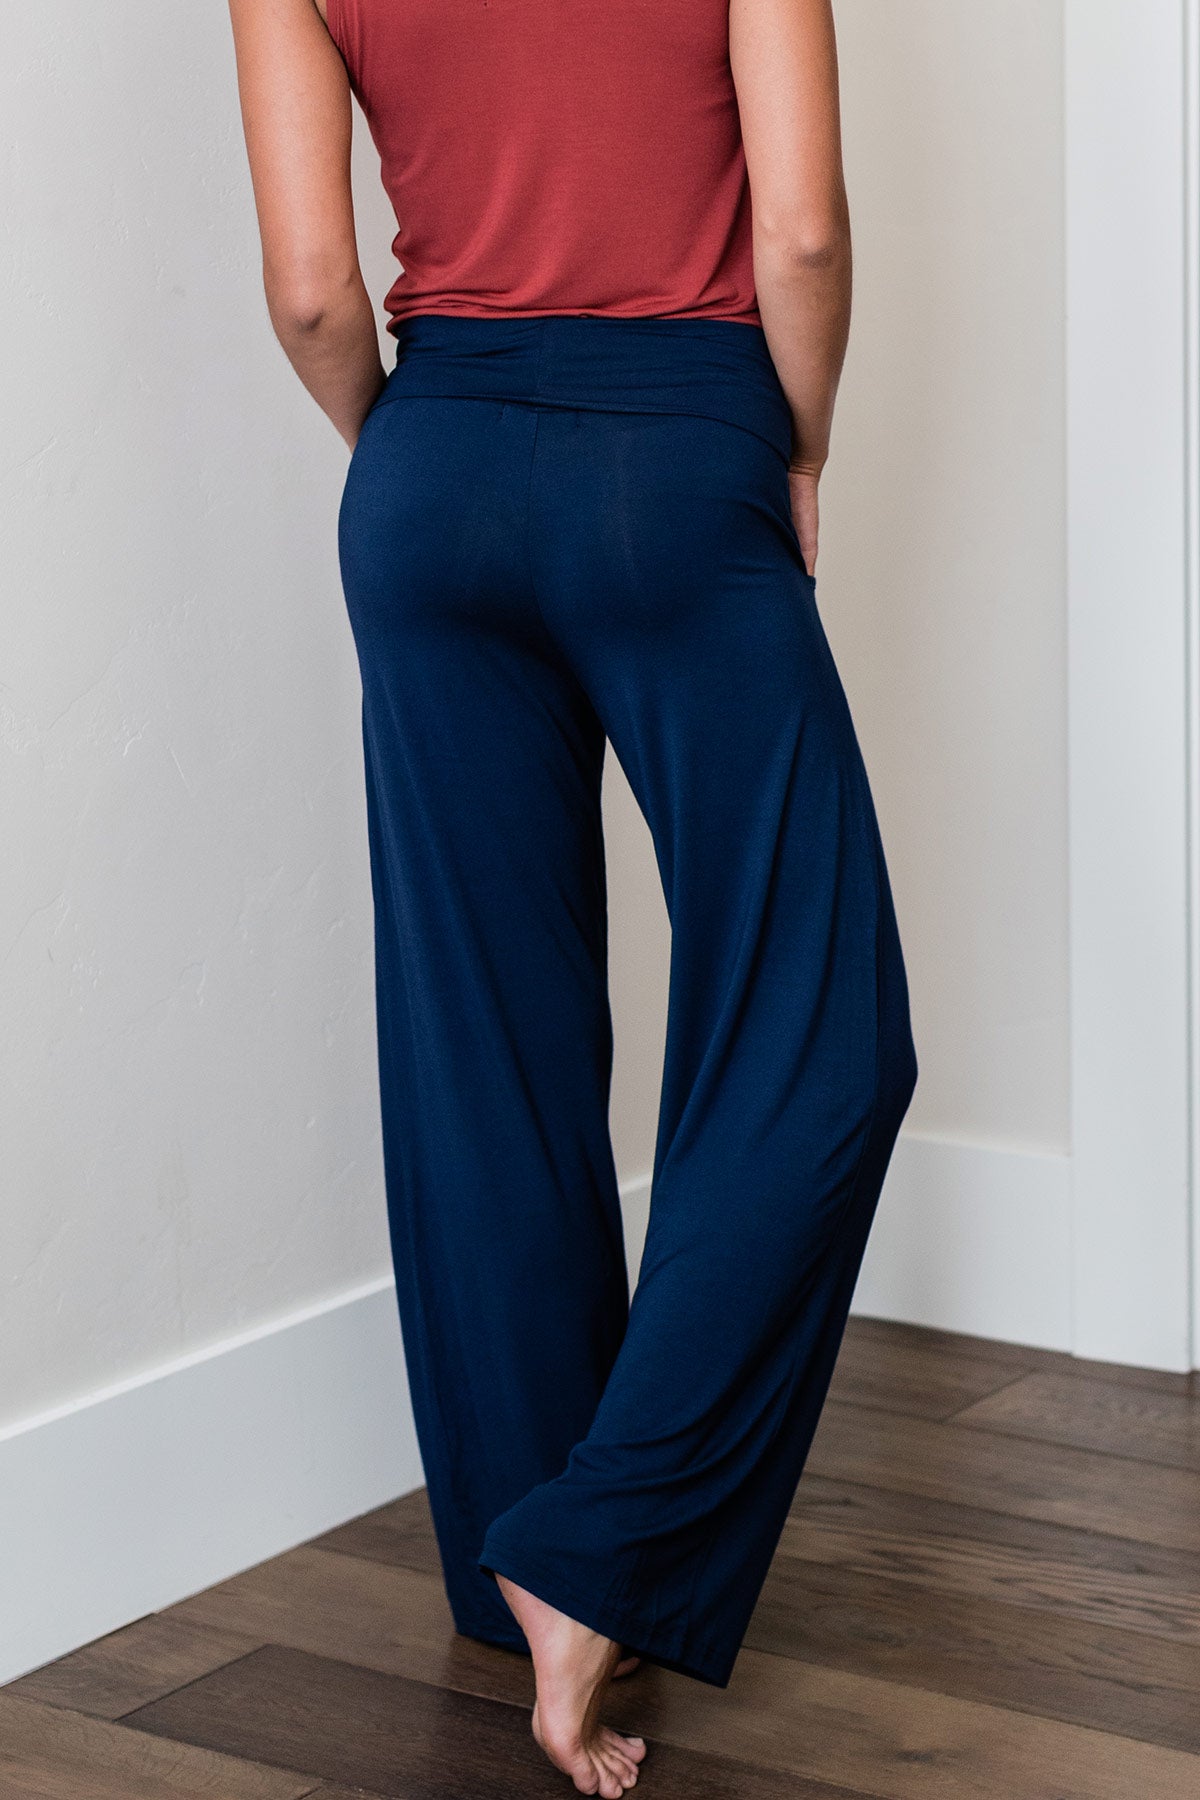 Close shot of a woman's legs from behind, wearing Yala Kayla Wide Leg Foldover Waist Bamboo Pants in Navy